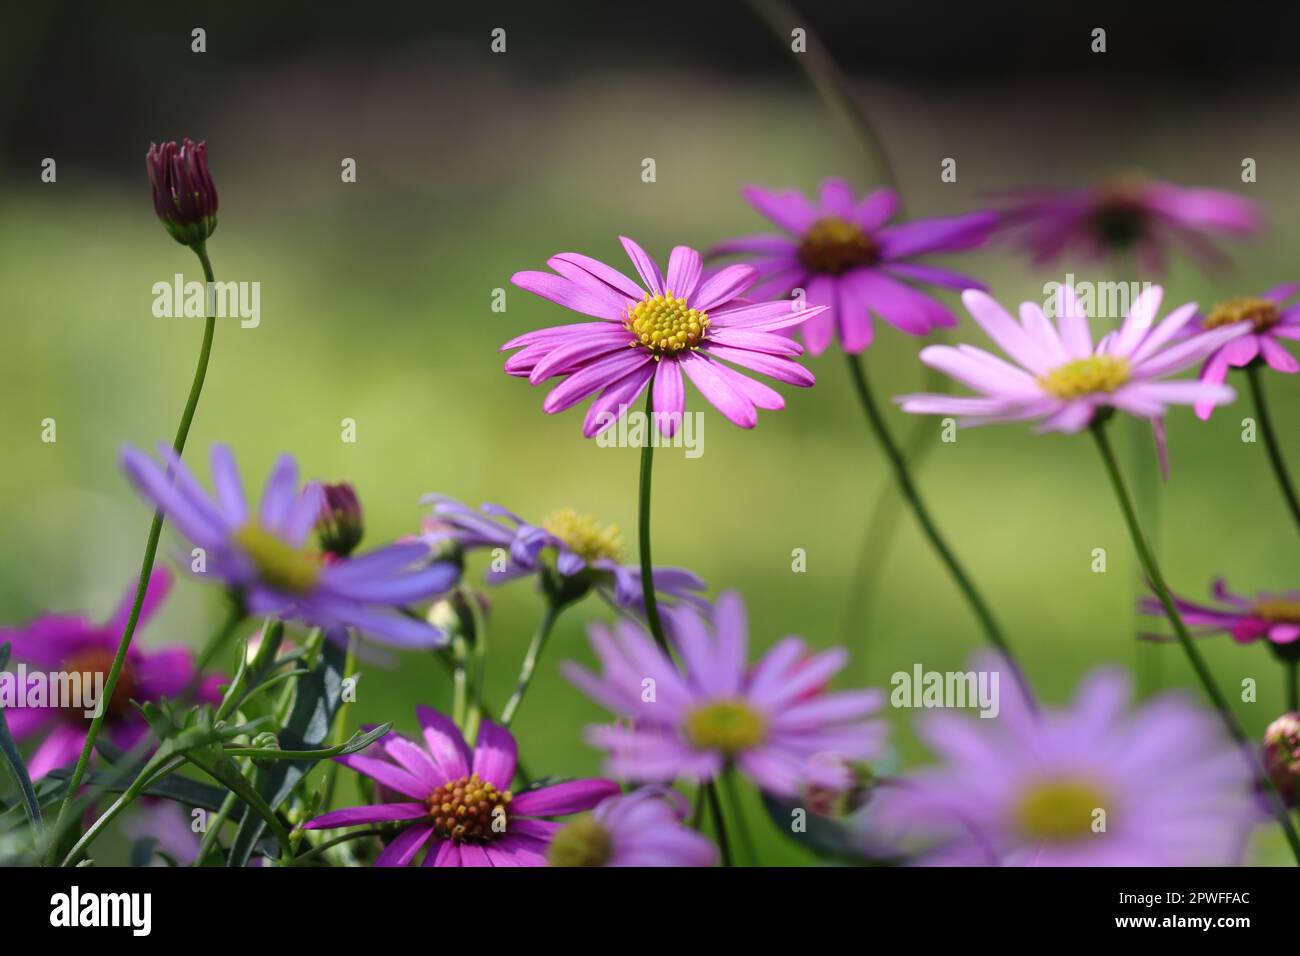 close-up of beautiful australian daisies against a sunlit blurry background Stock Photo